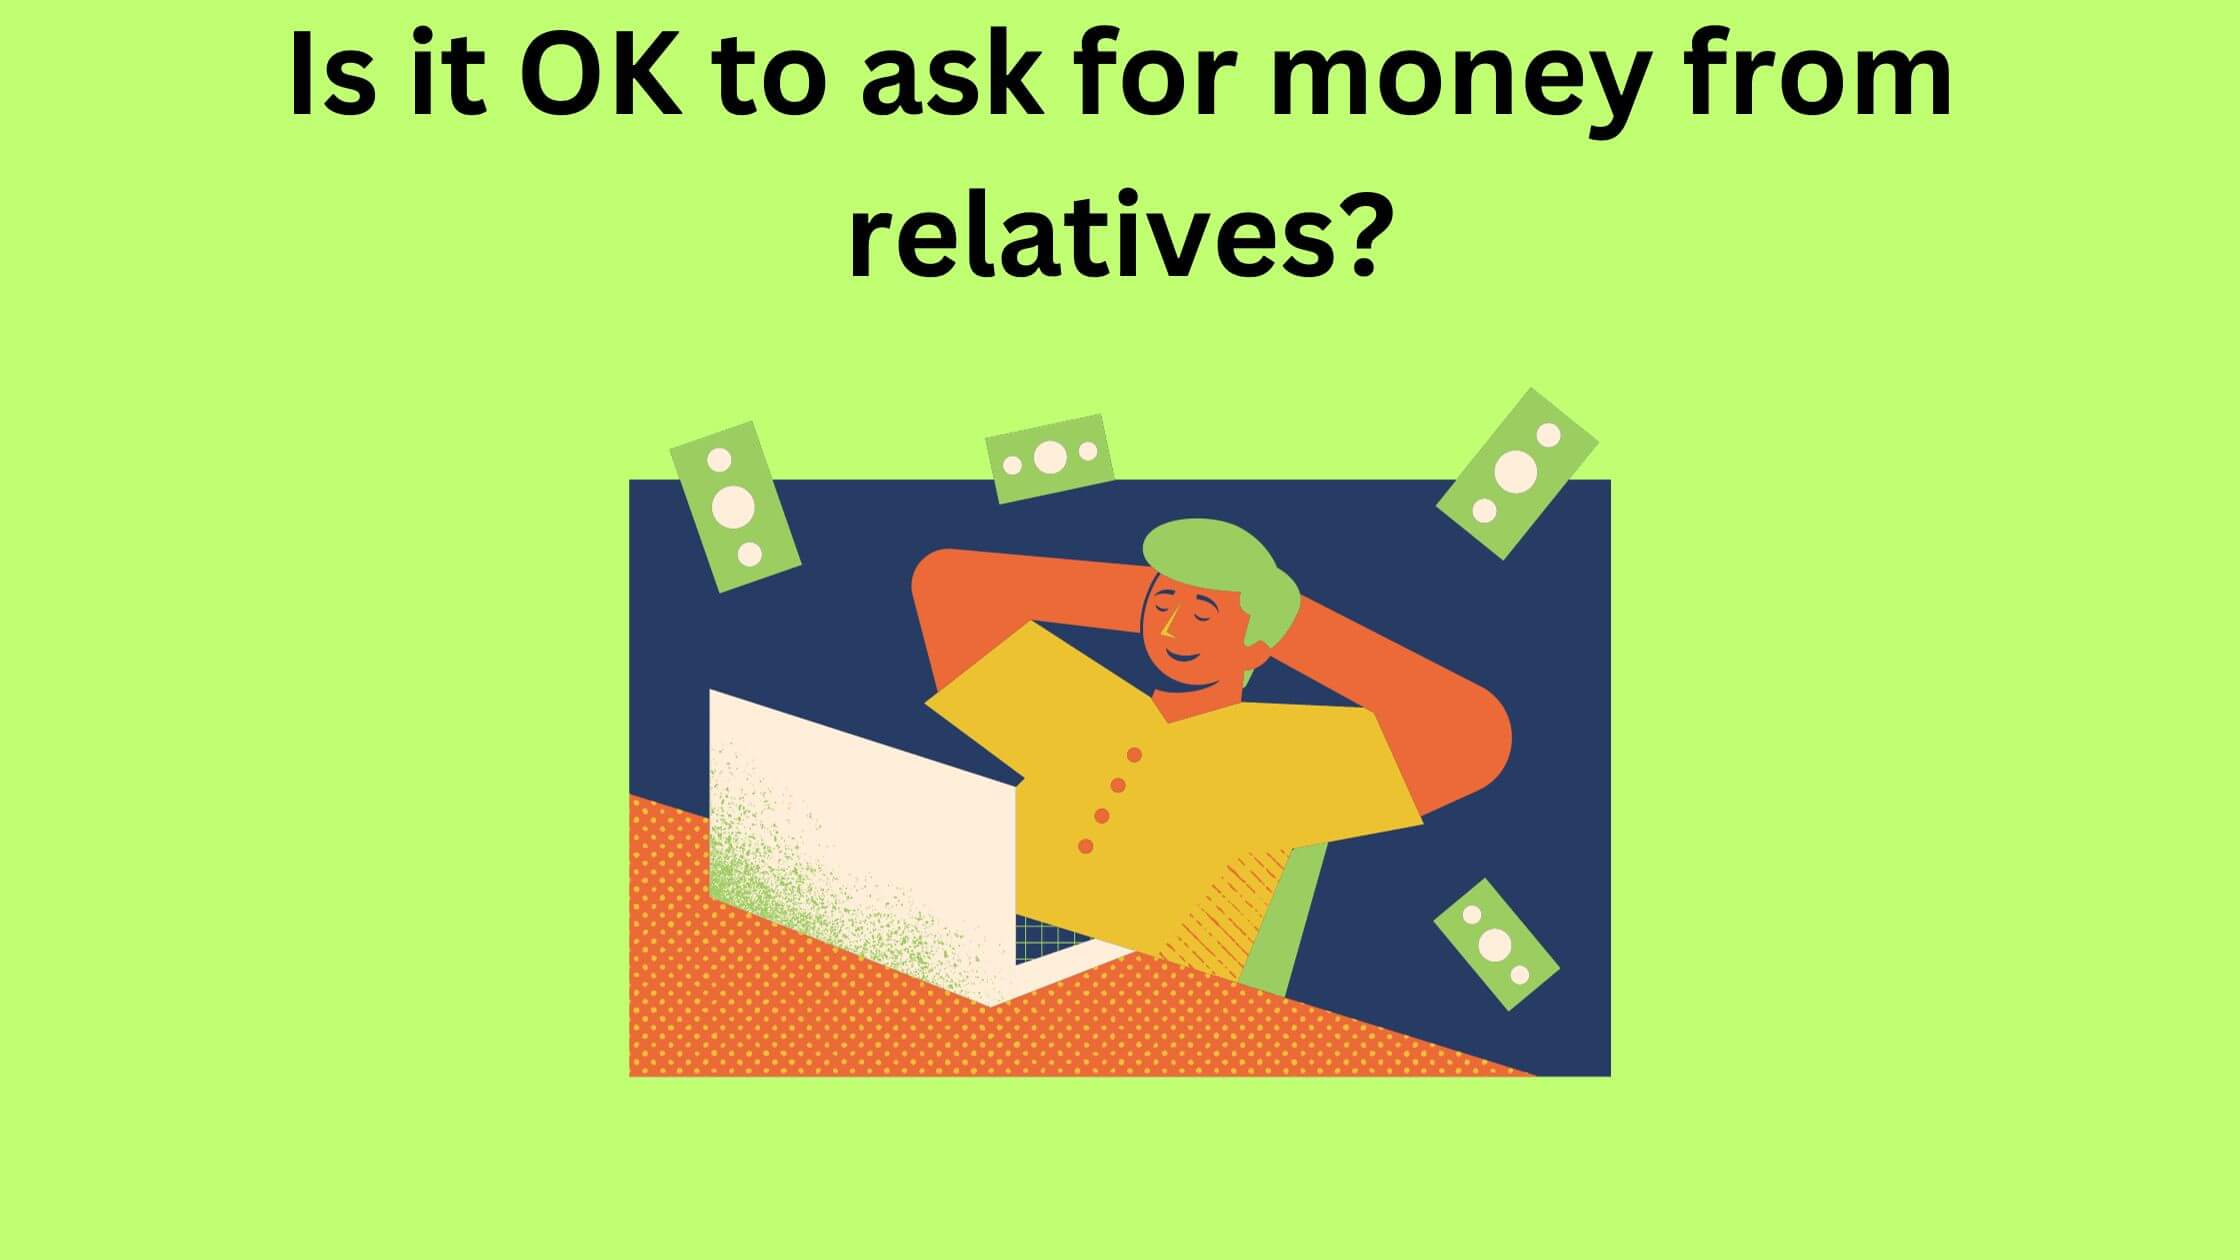 Is it OK to ask for money from relatives?